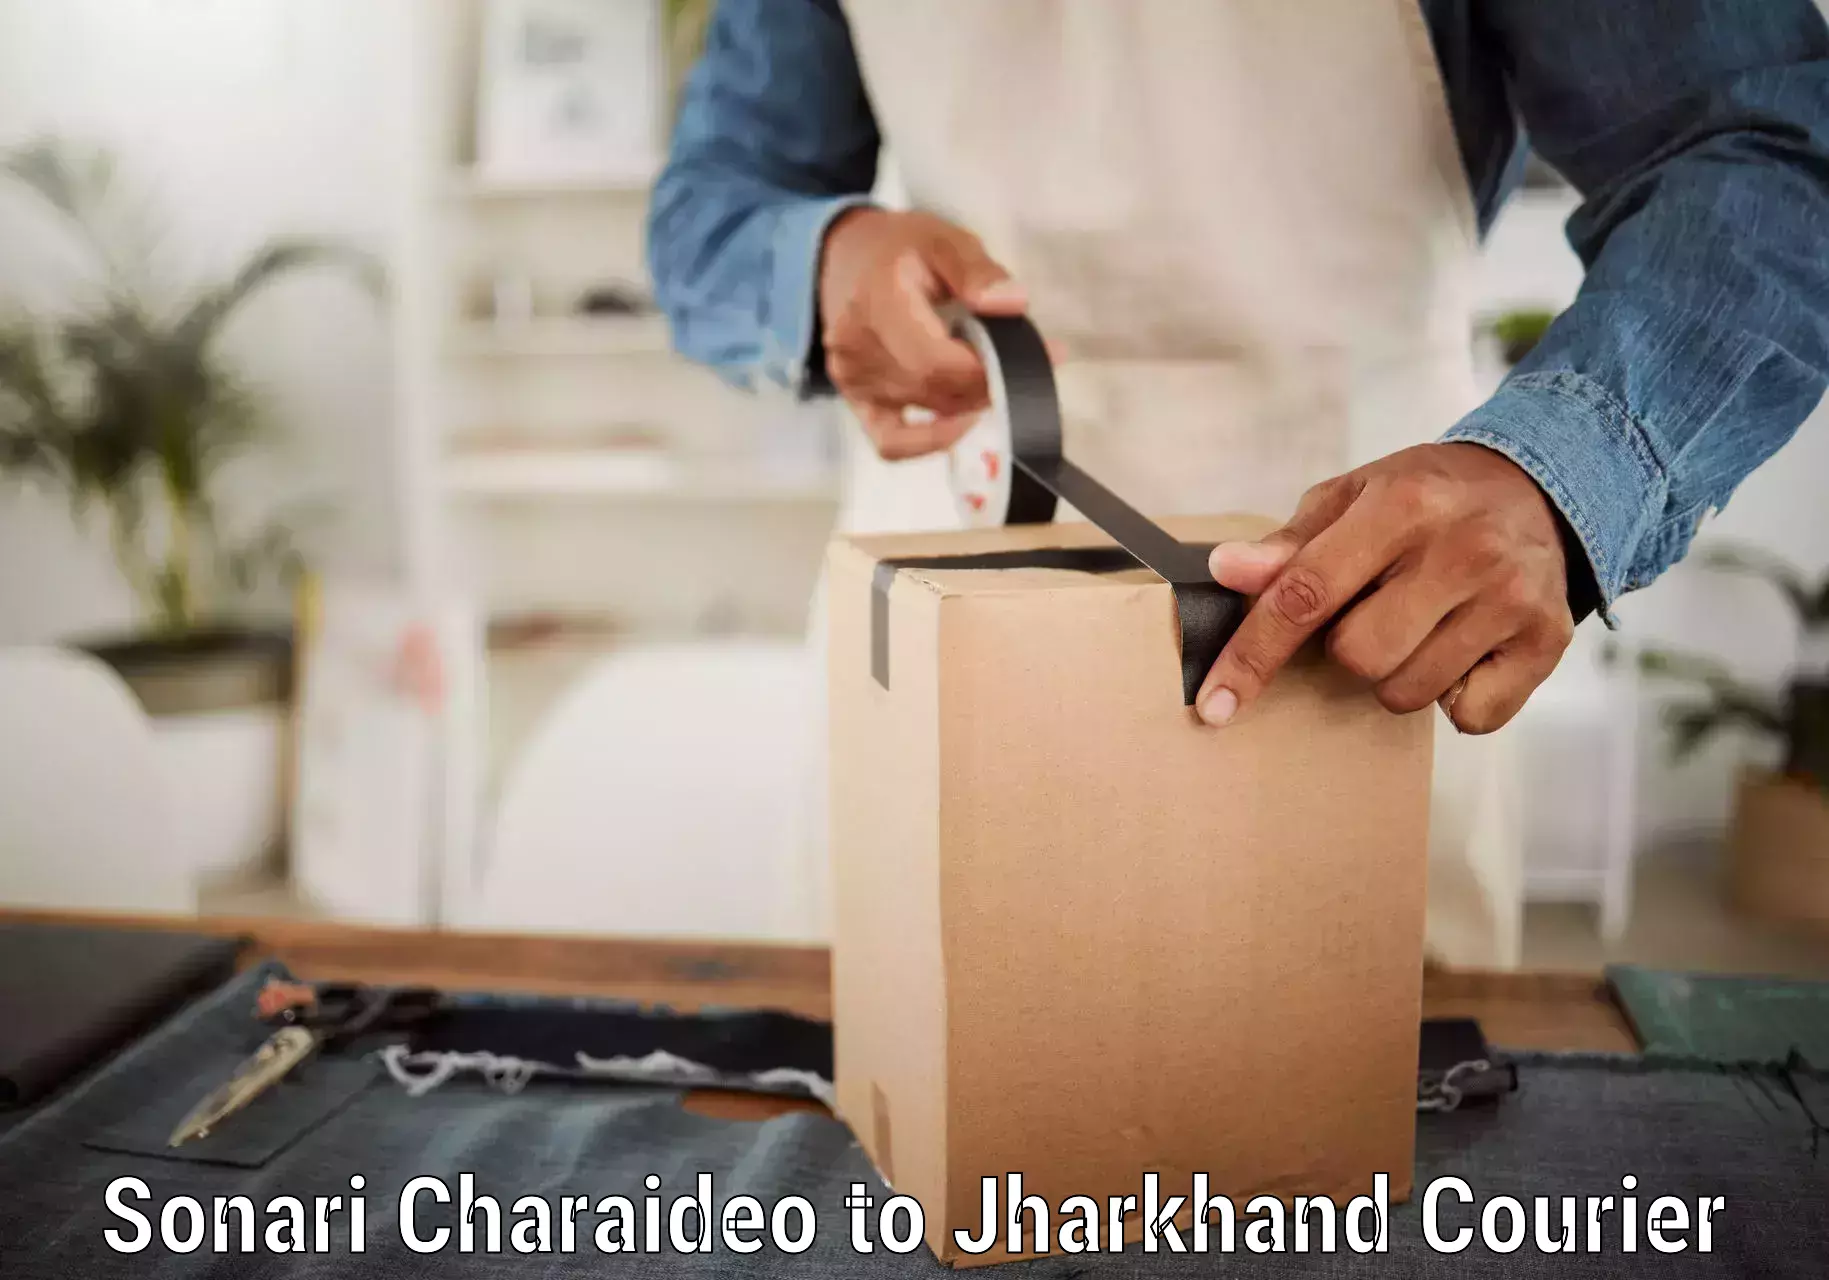 Automated parcel services Sonari Charaideo to Kedla